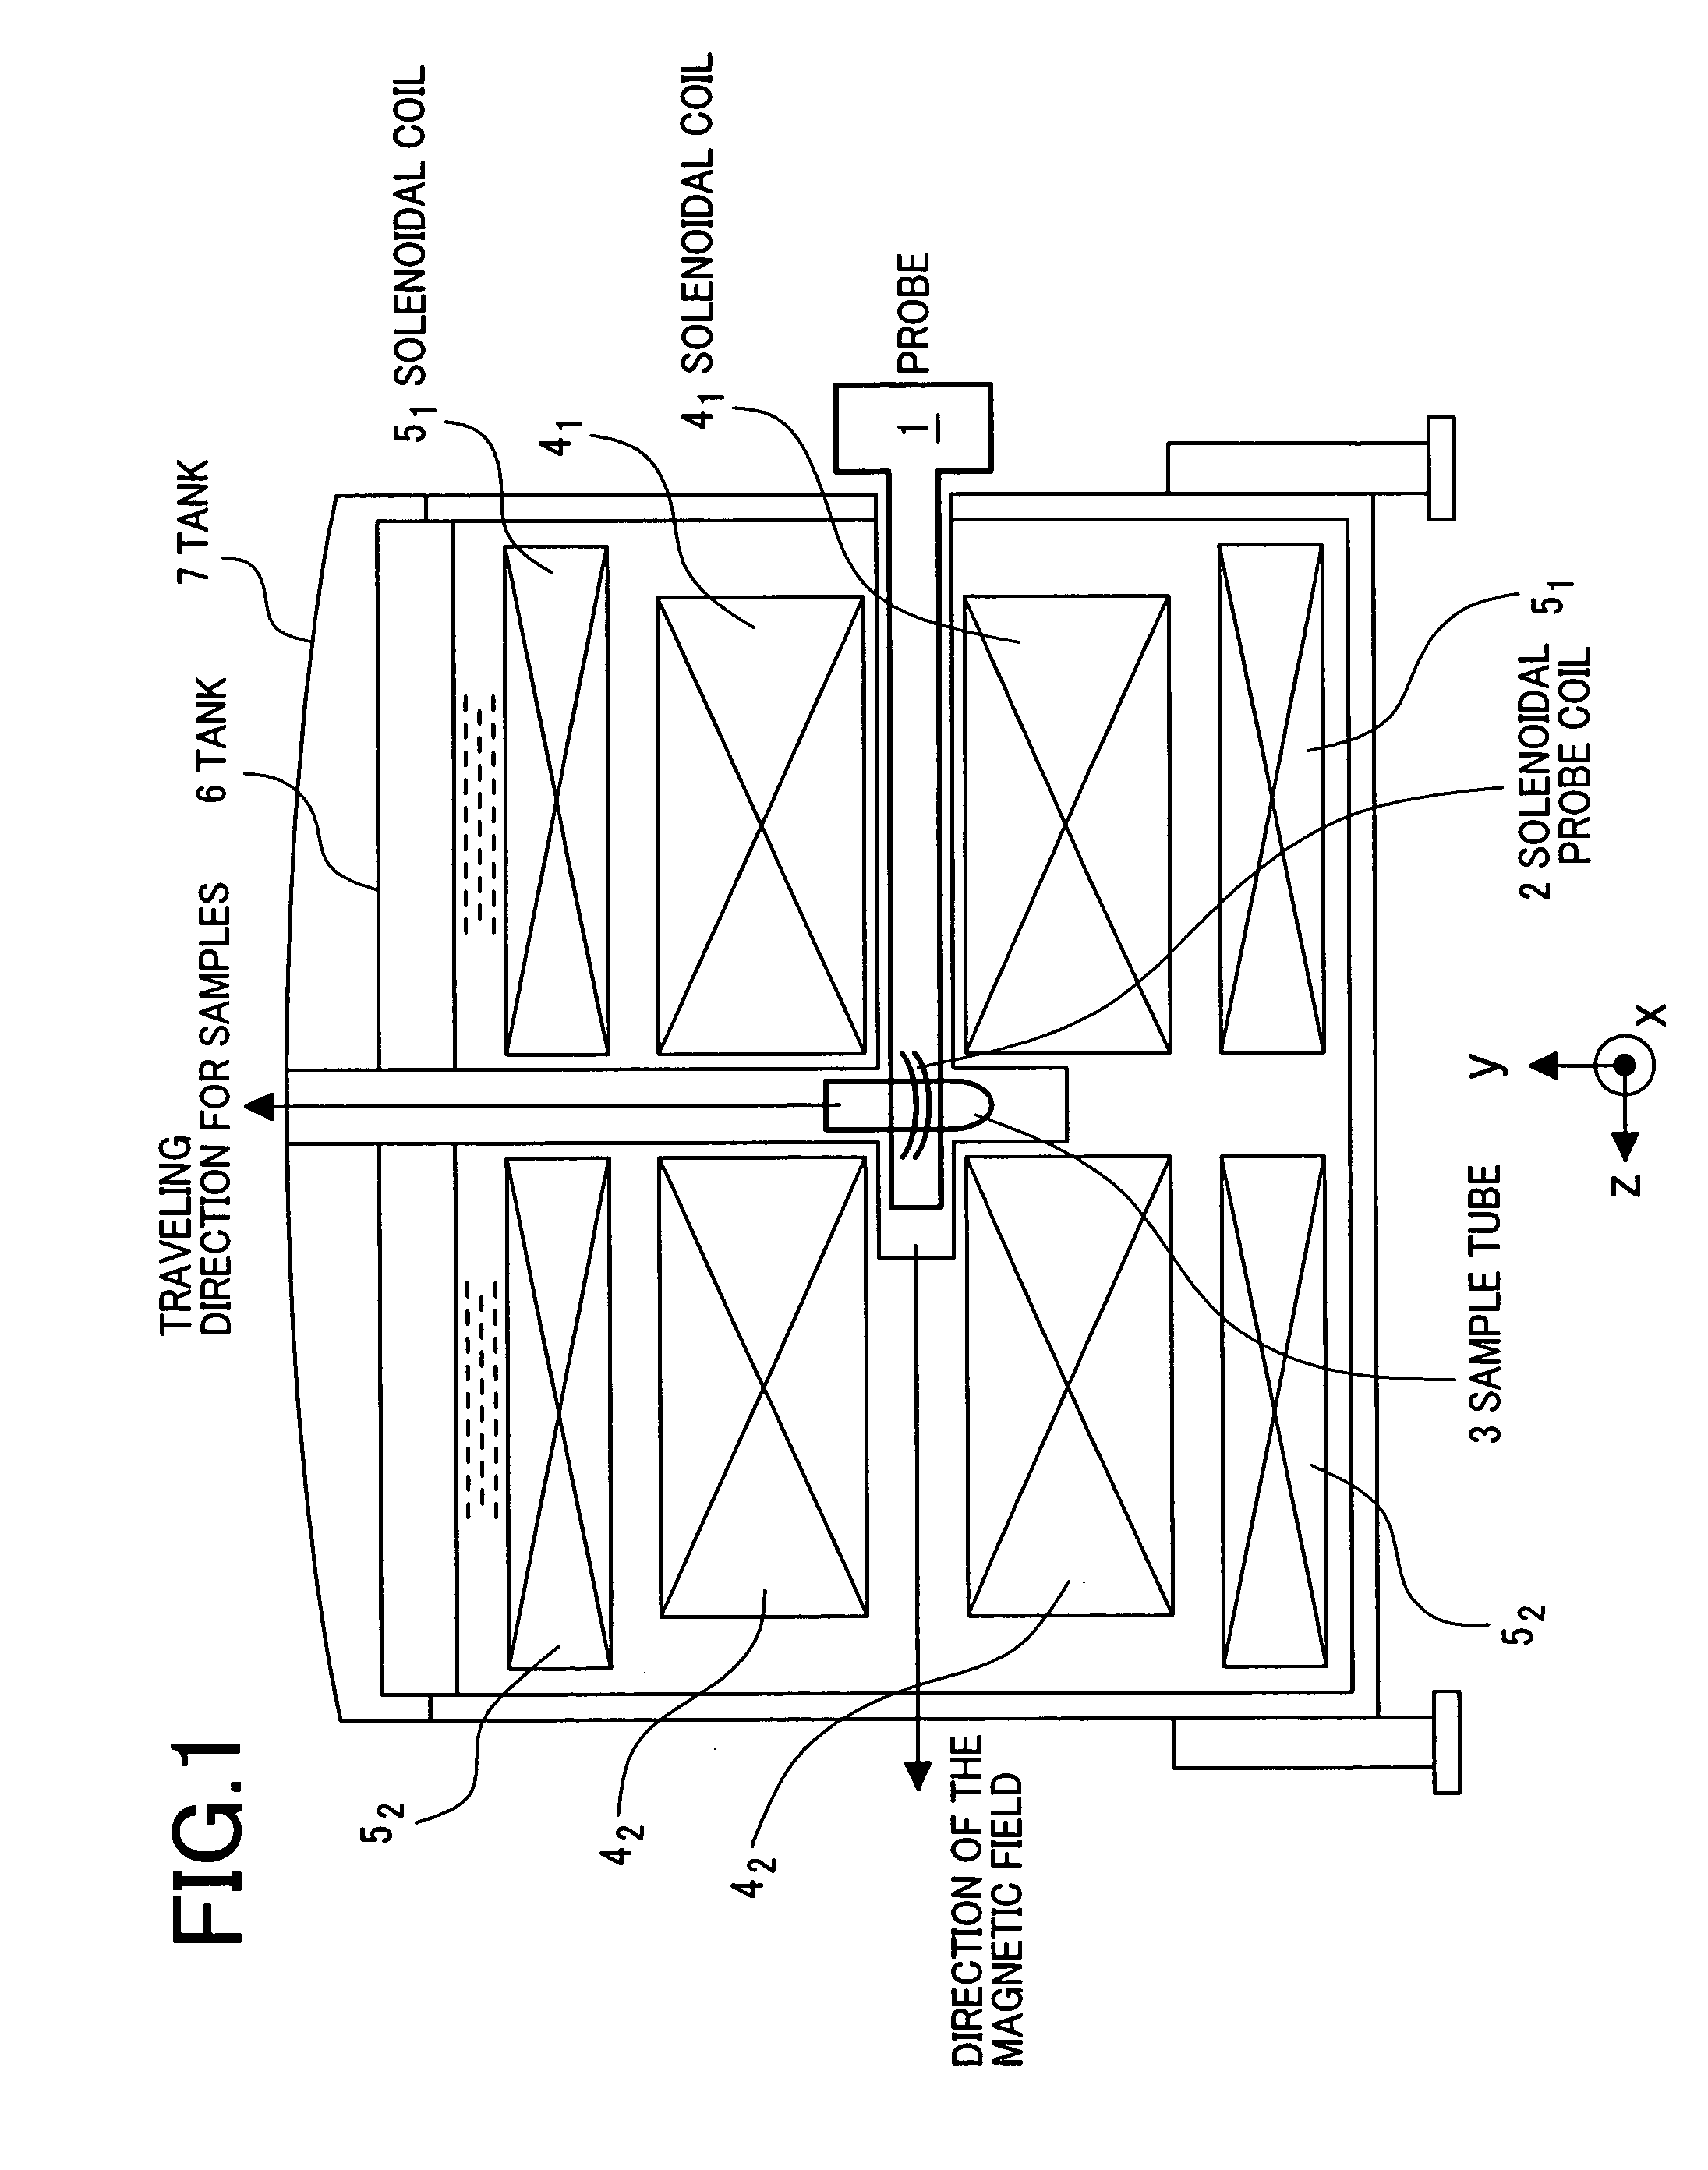 Nuclear magnetic resonance probe coil